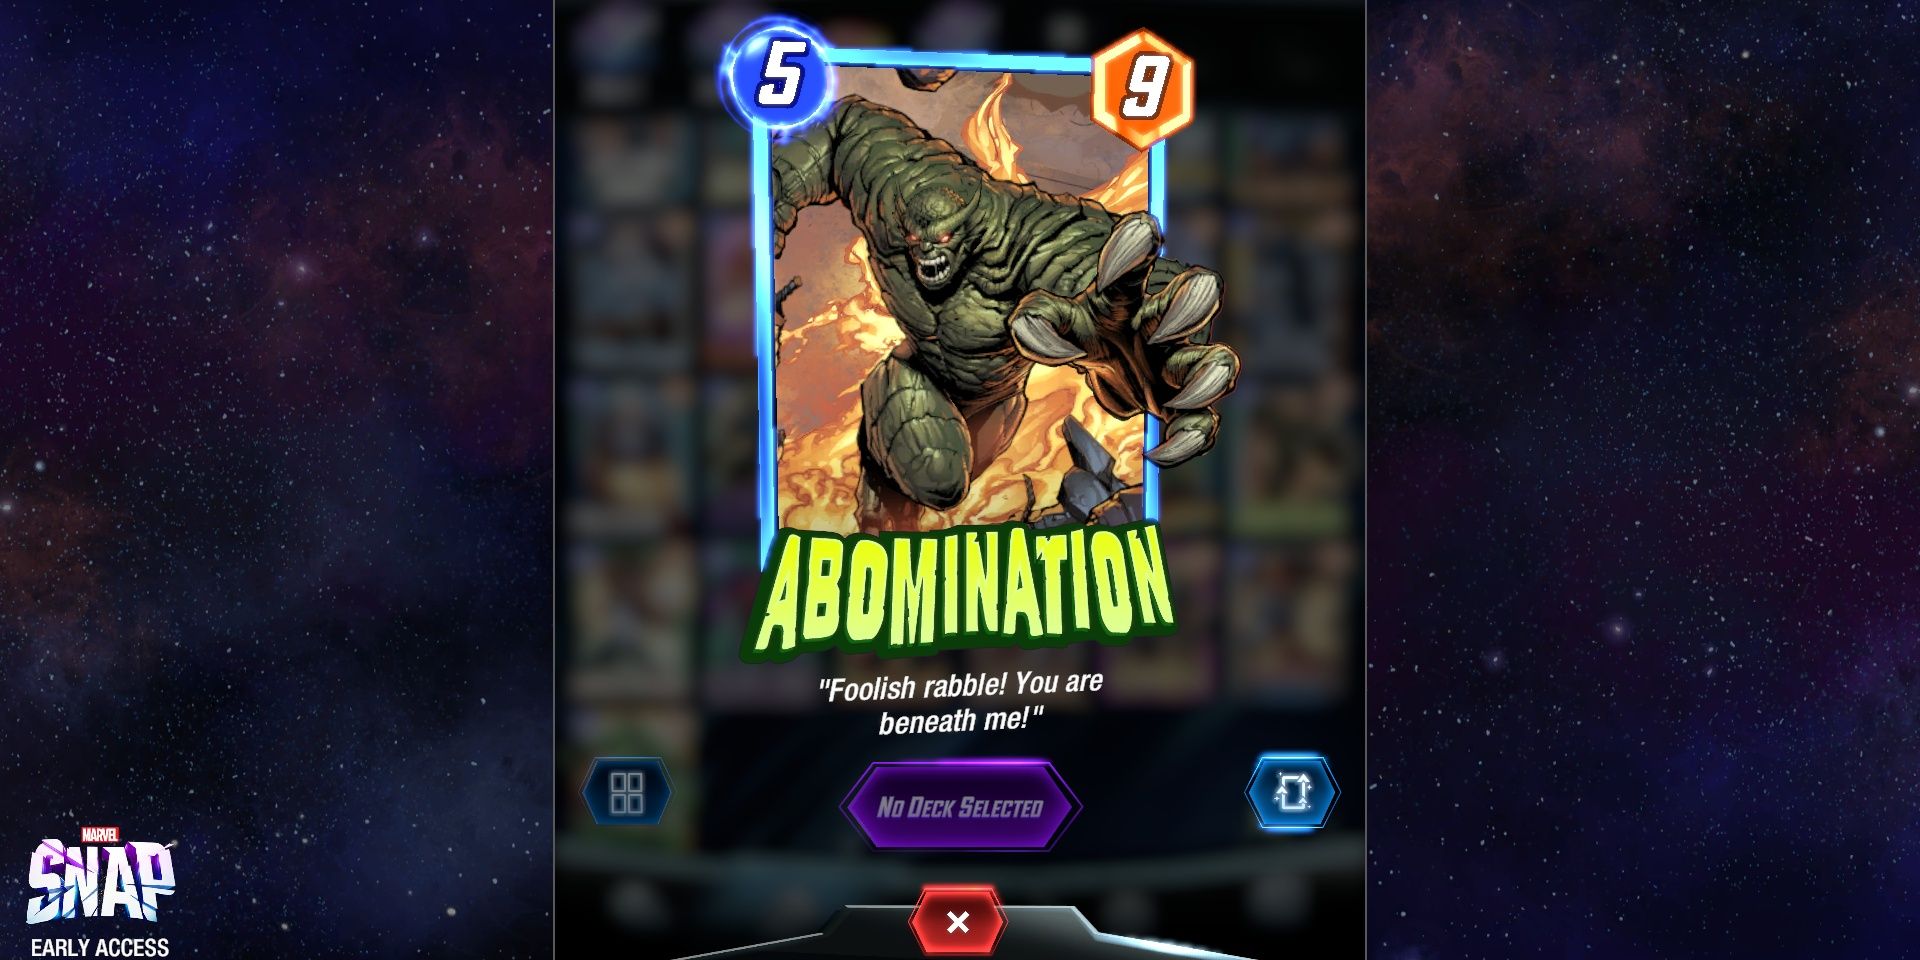 Abomination's Card in Marvel Snap.